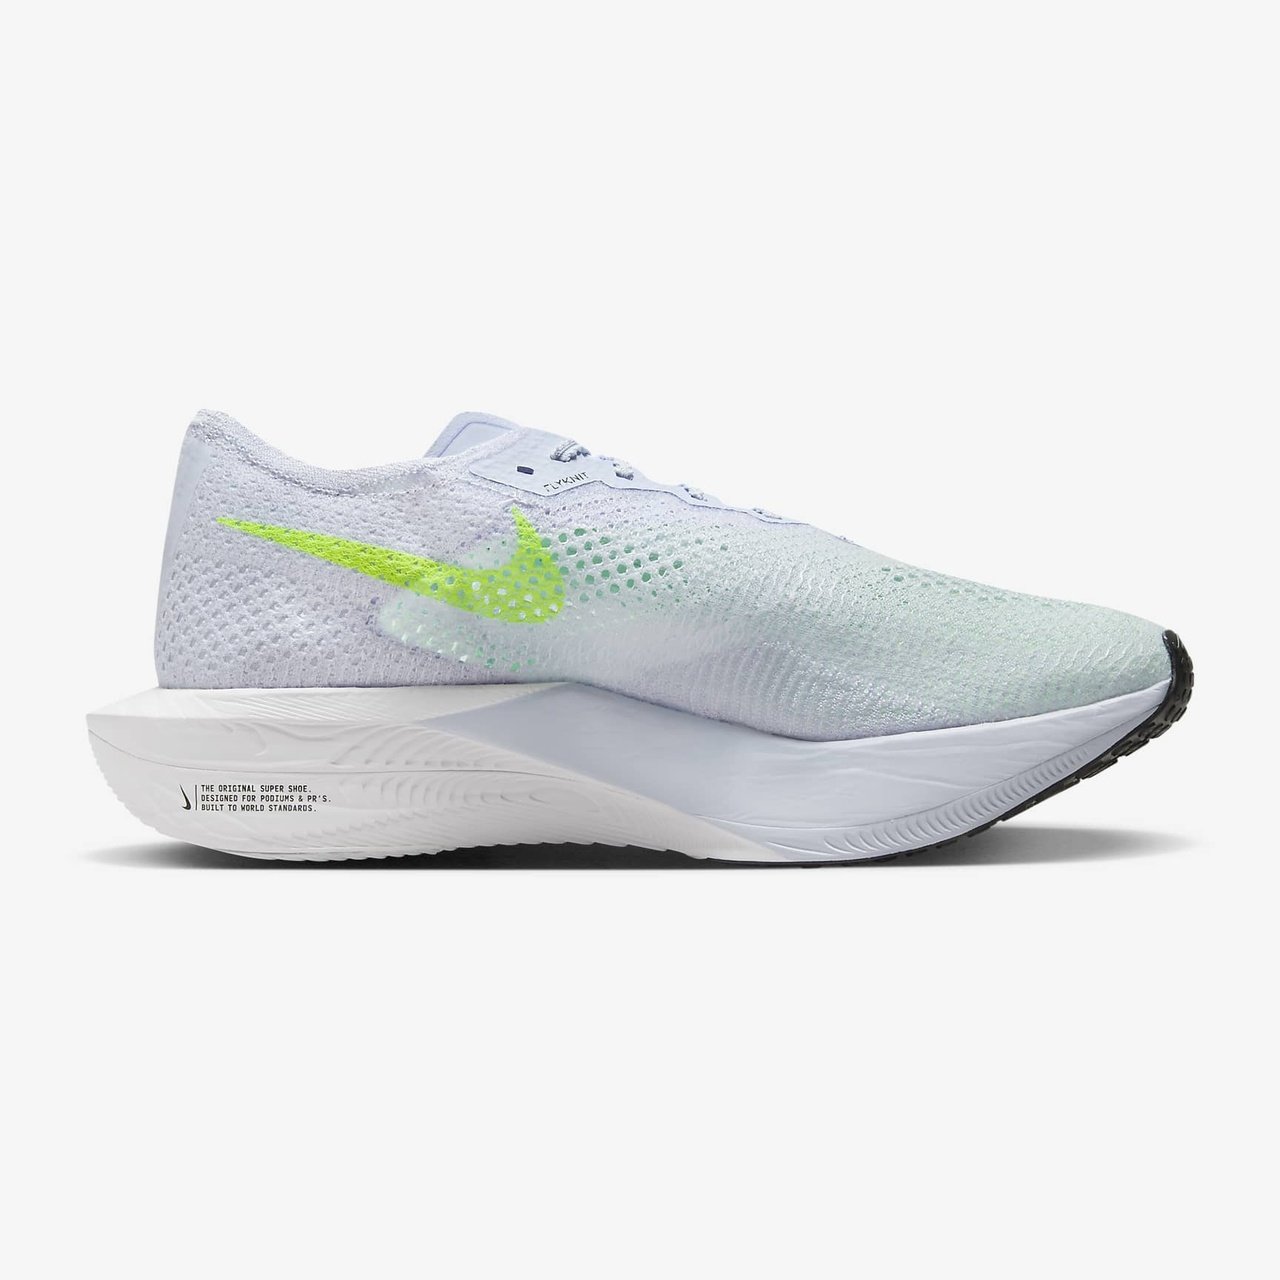 Nike ZoomX Vaporfly Next% 3 Mens FOOTWEAR - Mens Carbon Plate 